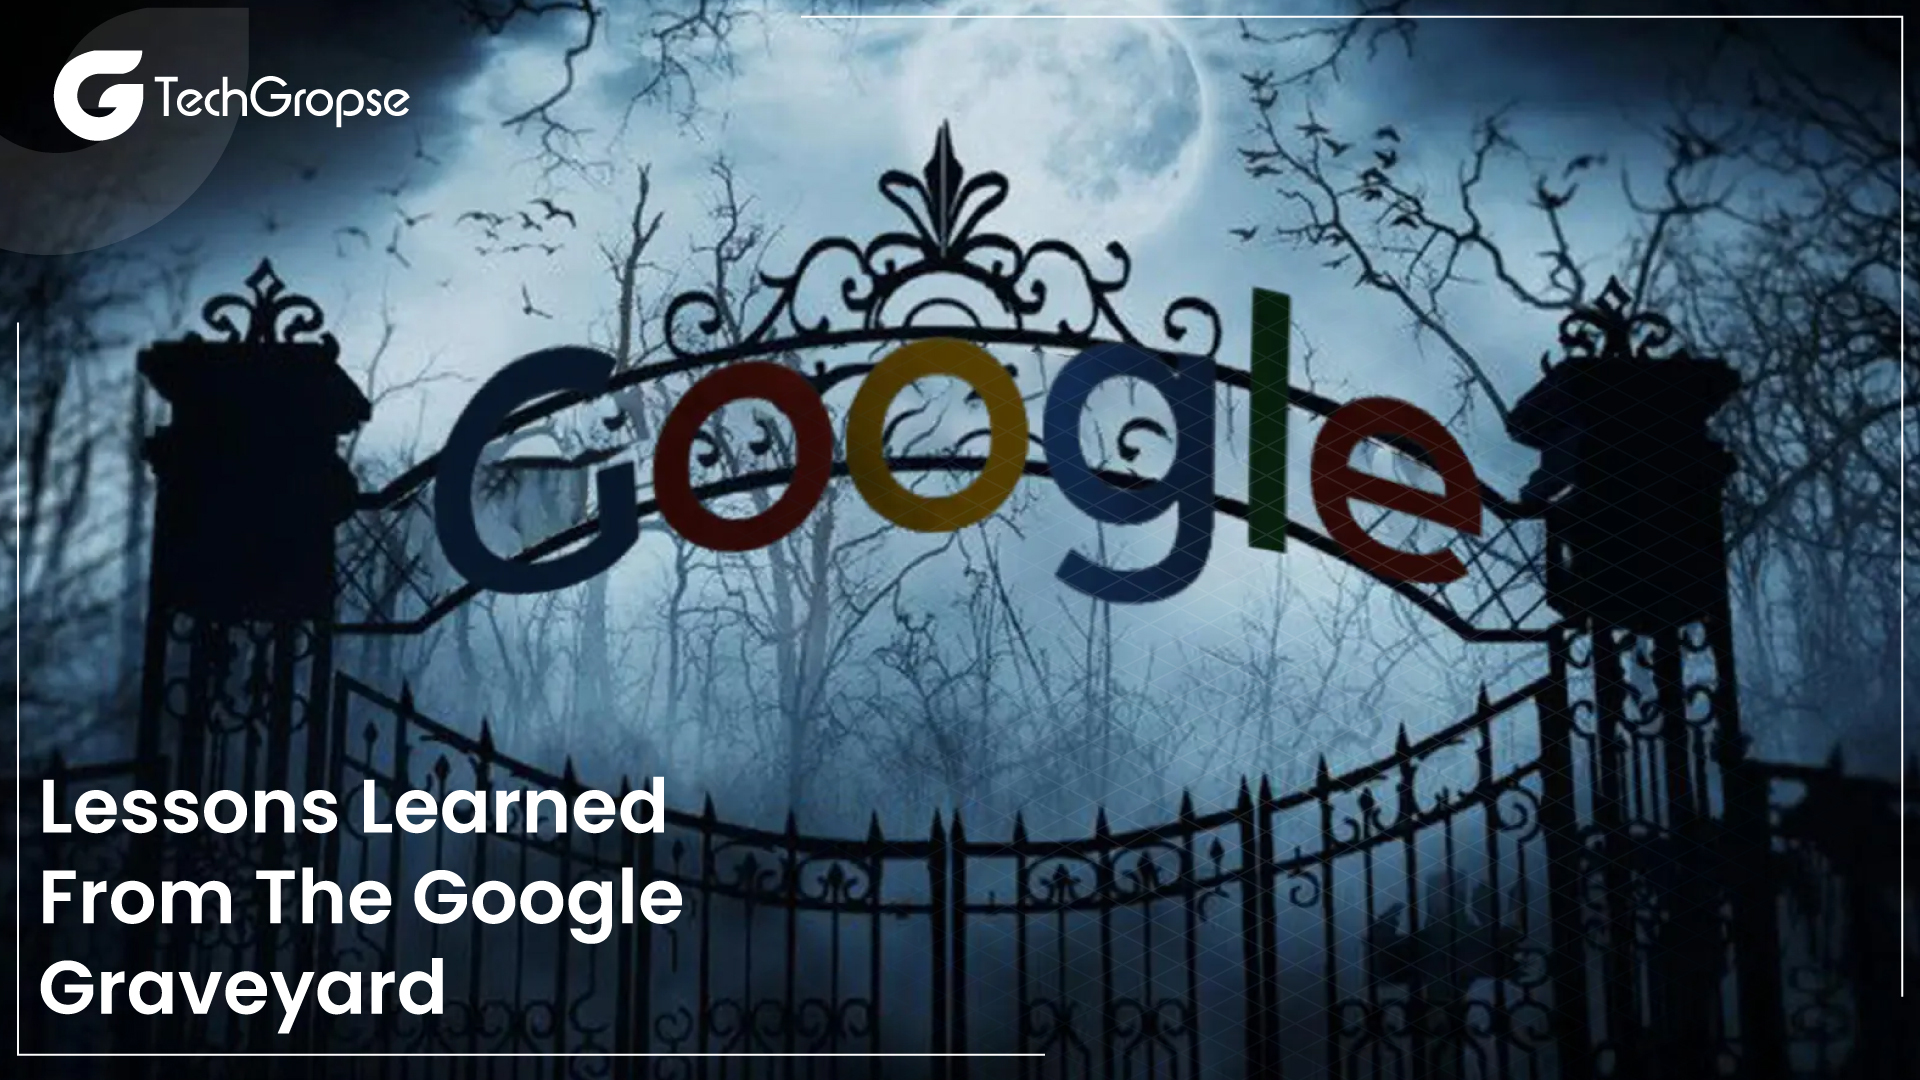 Lessons Learned from the Google Graveyard